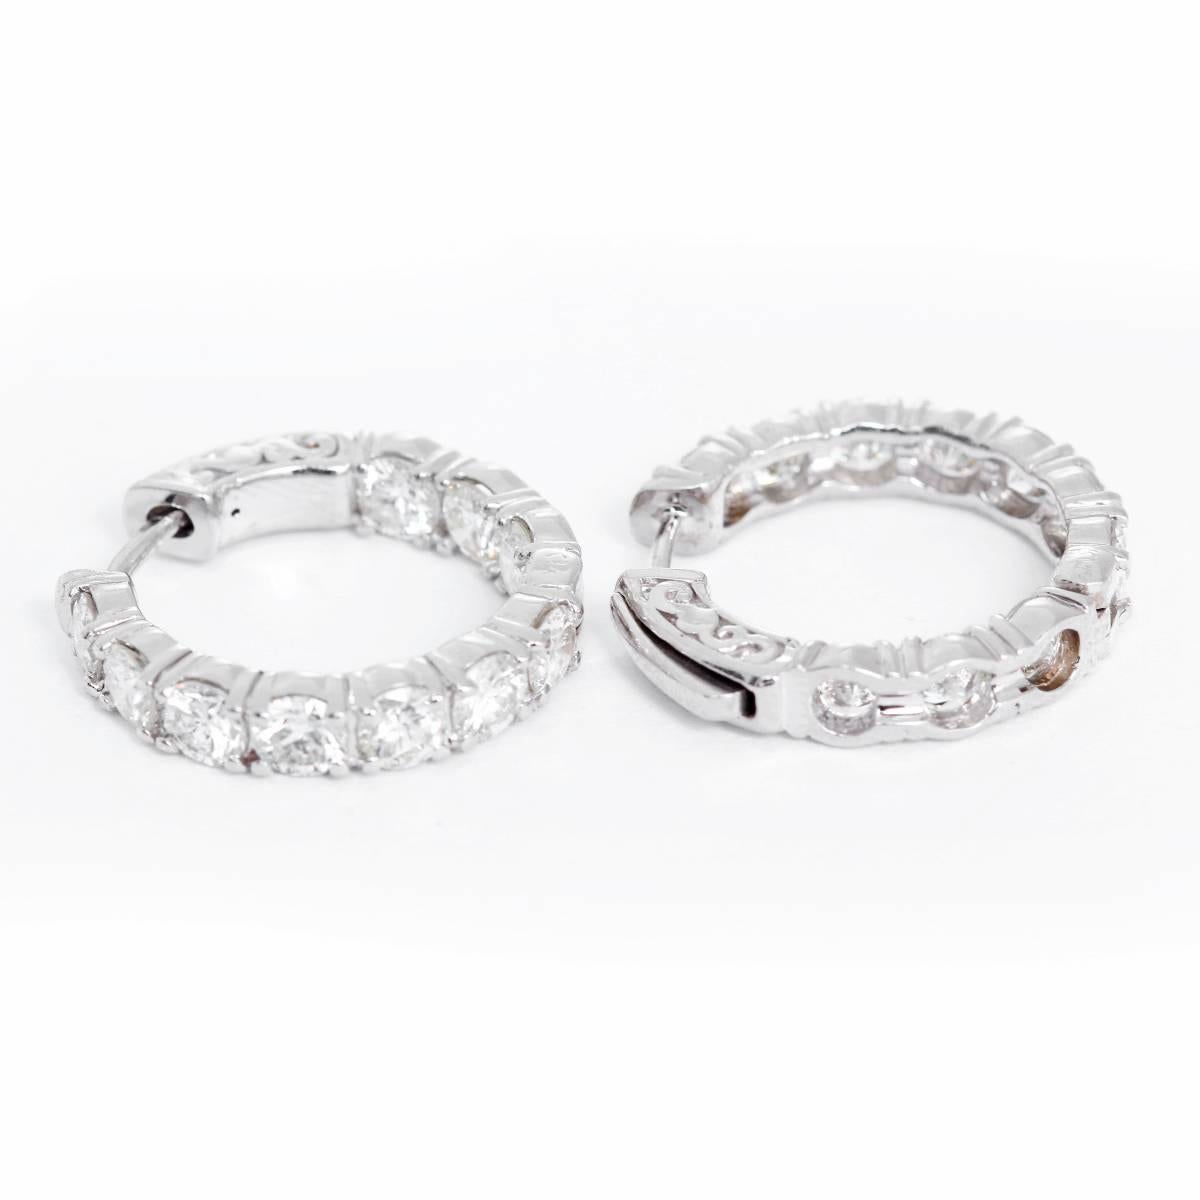 These inside-out style hoop earrings feature 3.94 carats of VS-SI-clarity and H-I-color diamonds set in 14k white gold. Earrings measure apx. 3/4- inch in diameter.  Total weight is 7.3 grams.